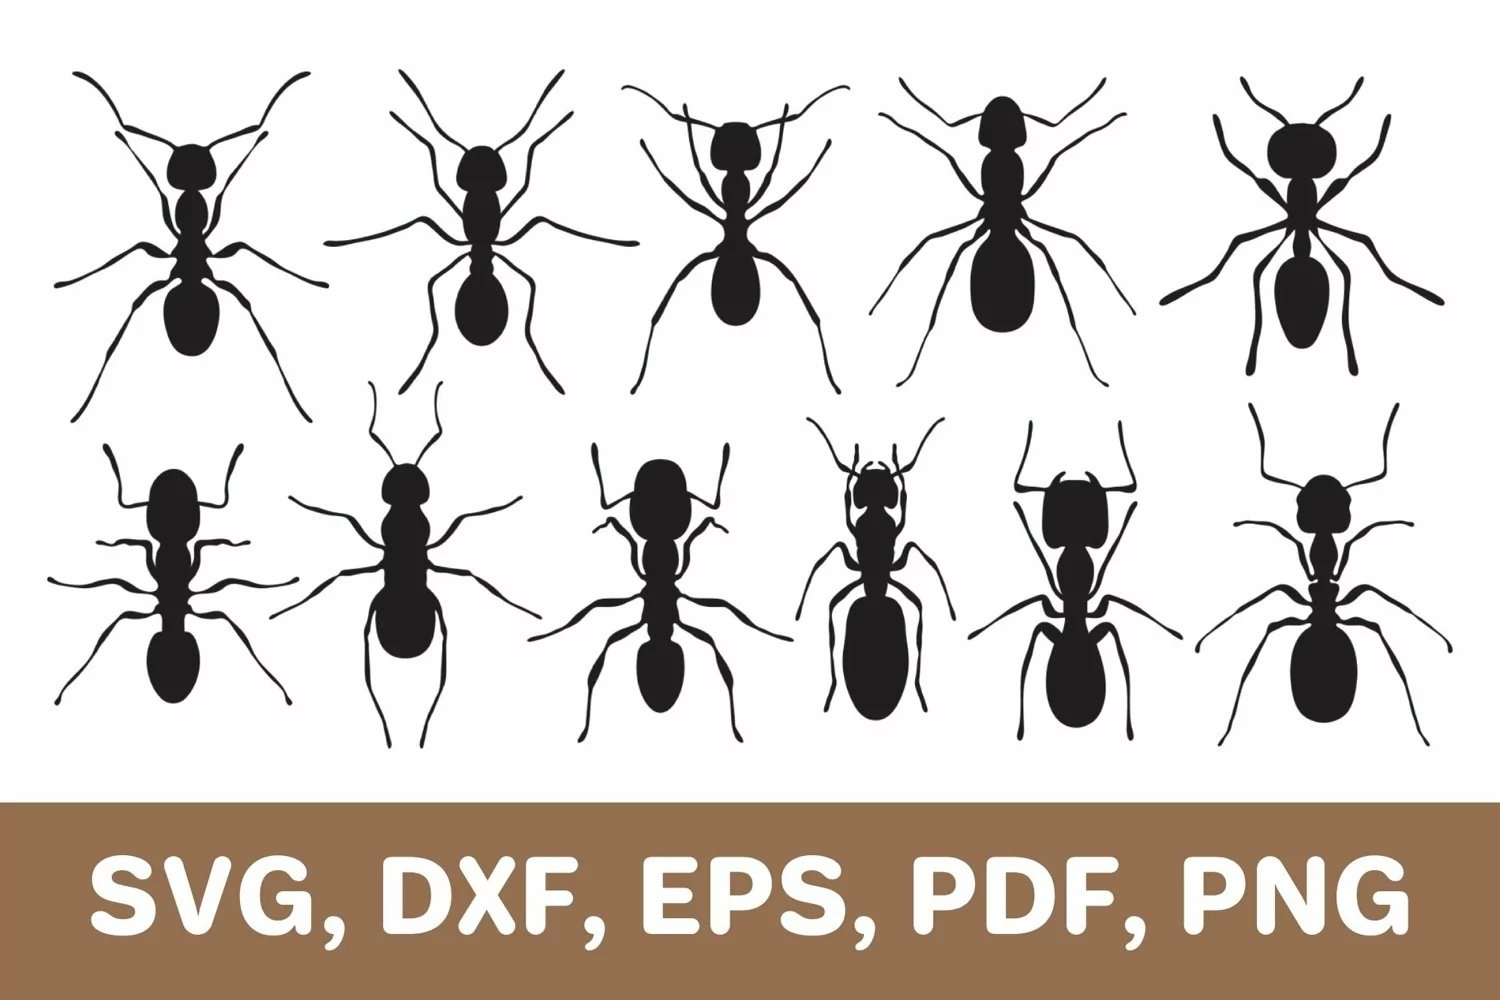 Ant svg cut file, ants silhouette cover image.